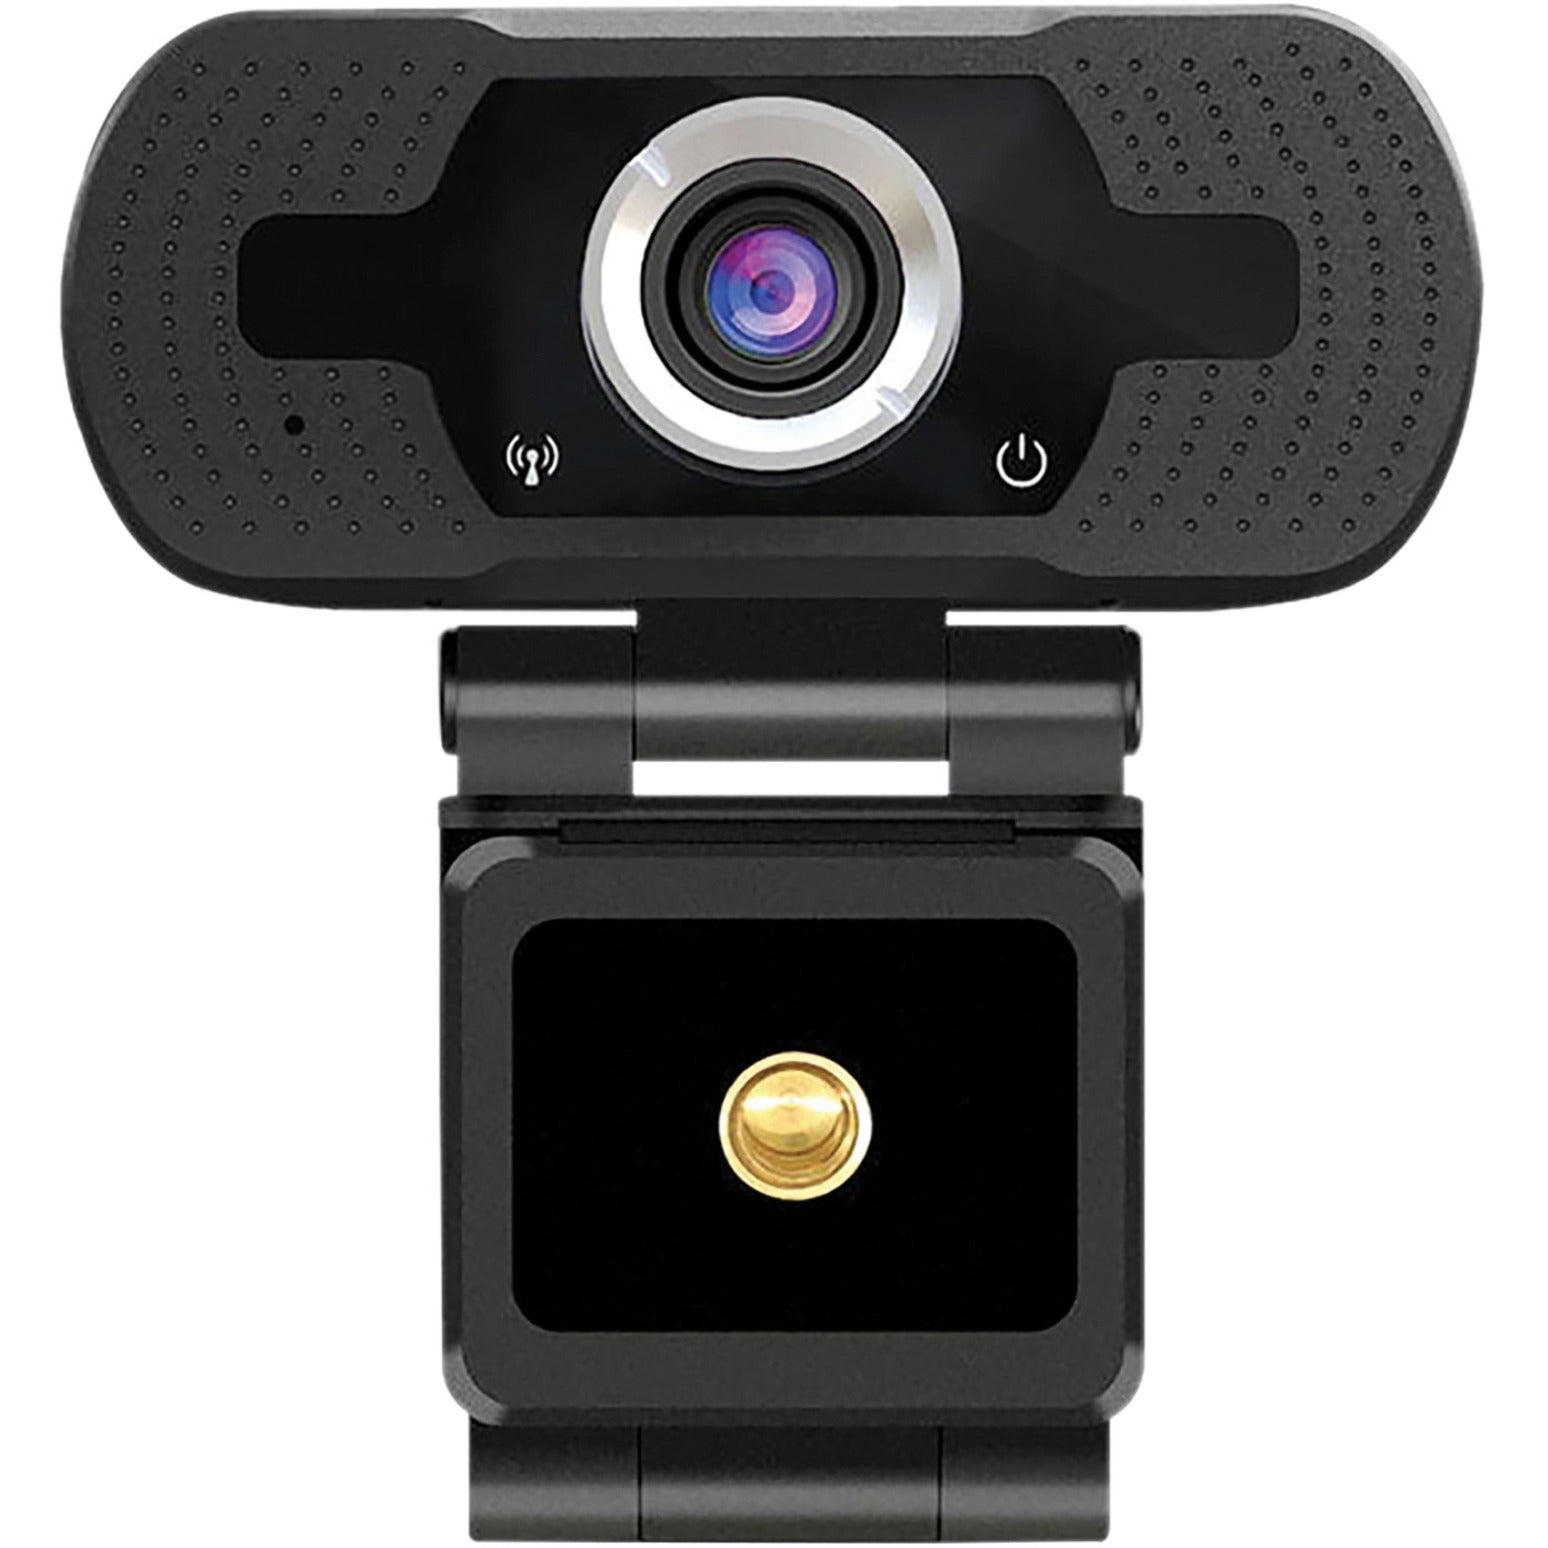 Urban Factory WHD20UF WEBEE 1080p Full HD USB Webcam with Autofocus 2MP USB 3.0 Built-in Microphone  Urban Factory WHD20UF WEBEE 1080p Full HD USB Webcam con Autofocus 2MP USB 3.0 Microfono Incorporato